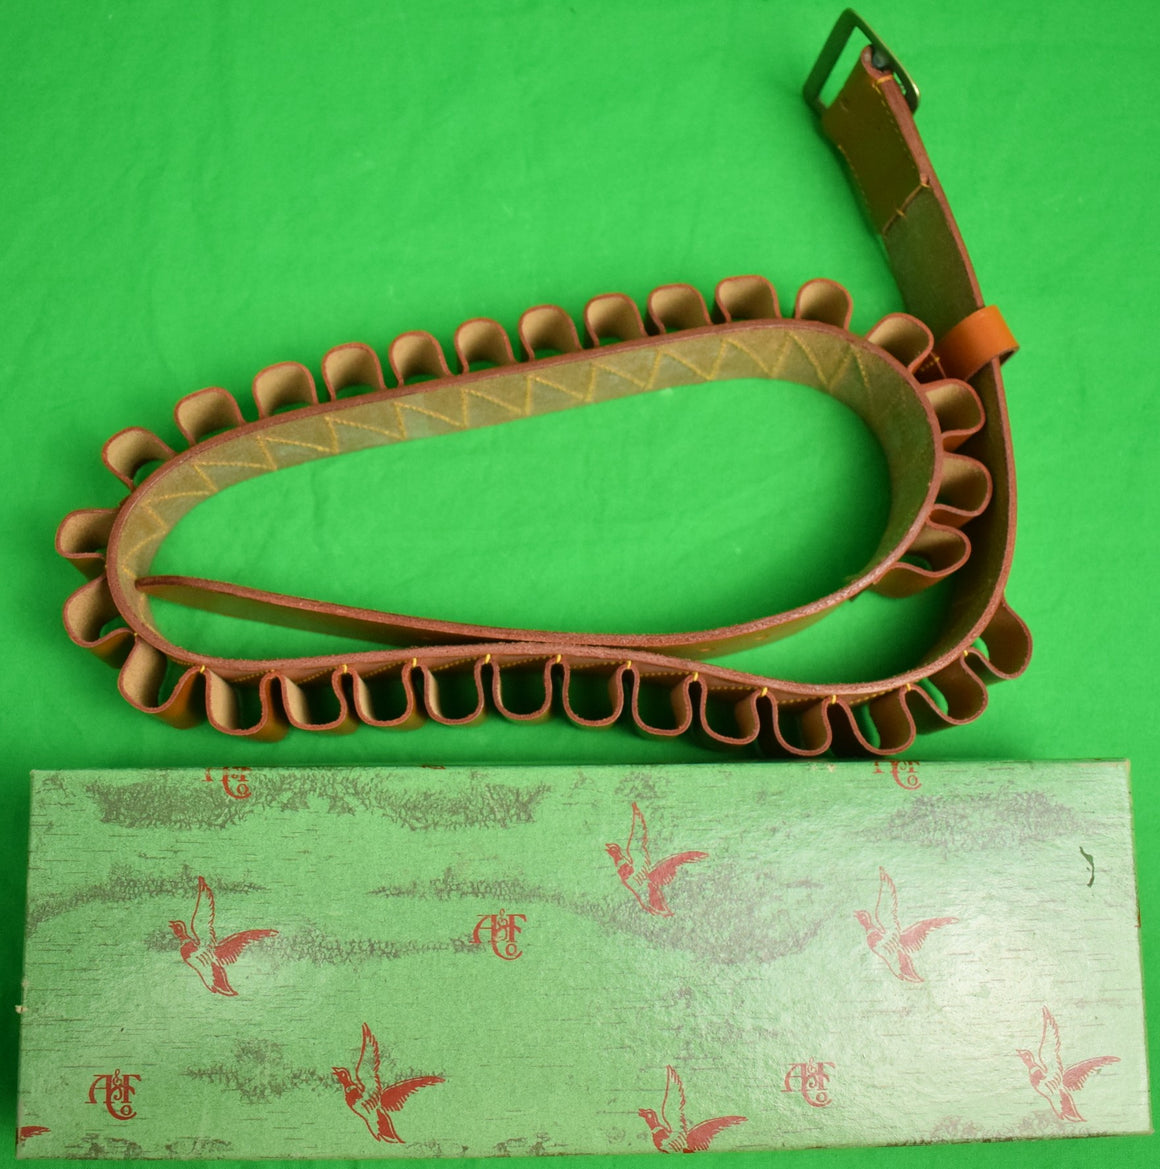 Abercrombie & Fitch 12 Gauge Shell Belt New/ Old Stock in A&F Box Sz: 38"W